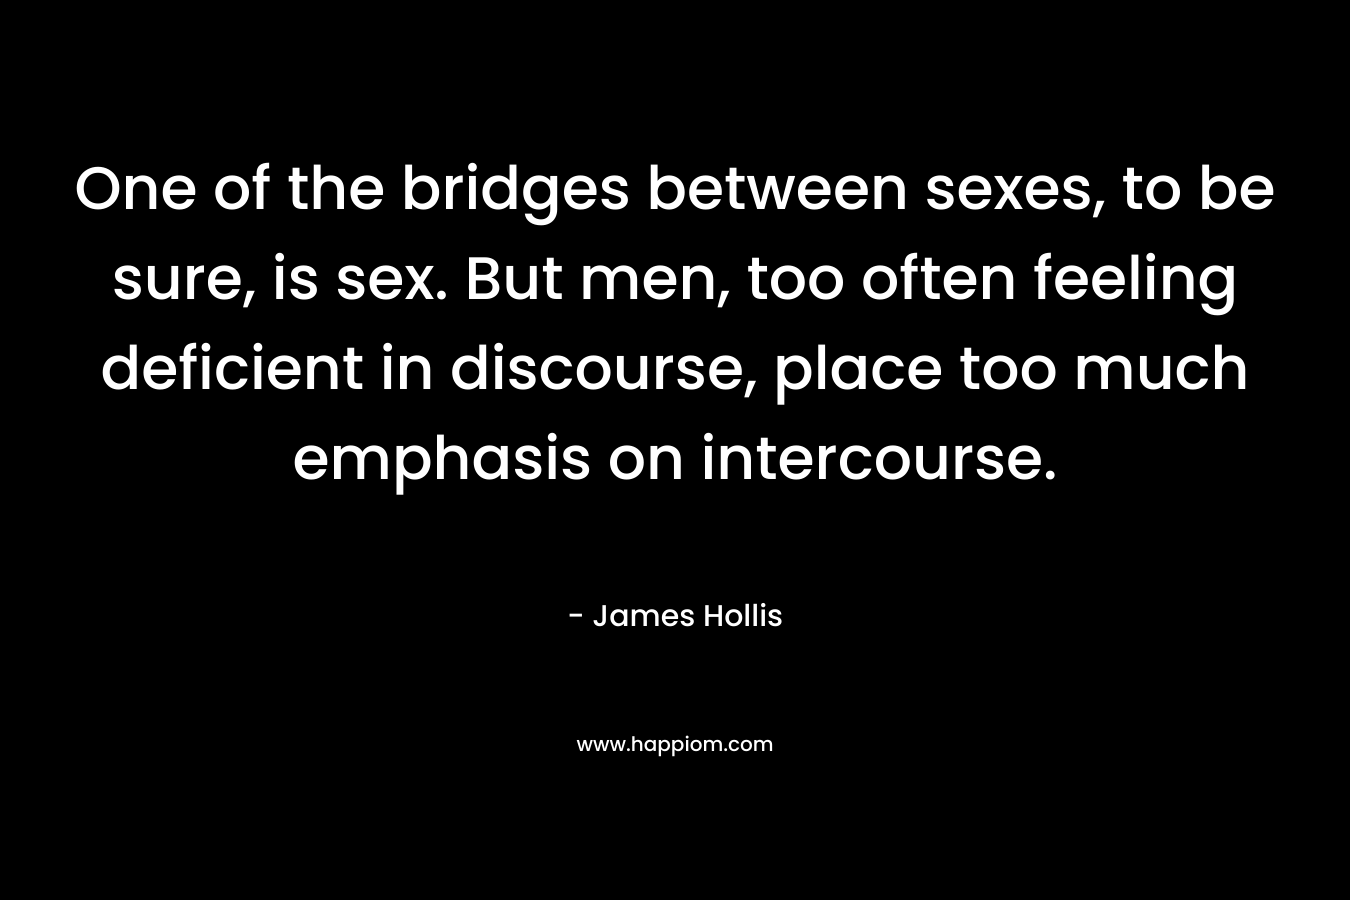 One of the bridges between sexes, to be sure, is sex. But men, too often feeling deficient in discourse, place too much emphasis on intercourse. – James Hollis